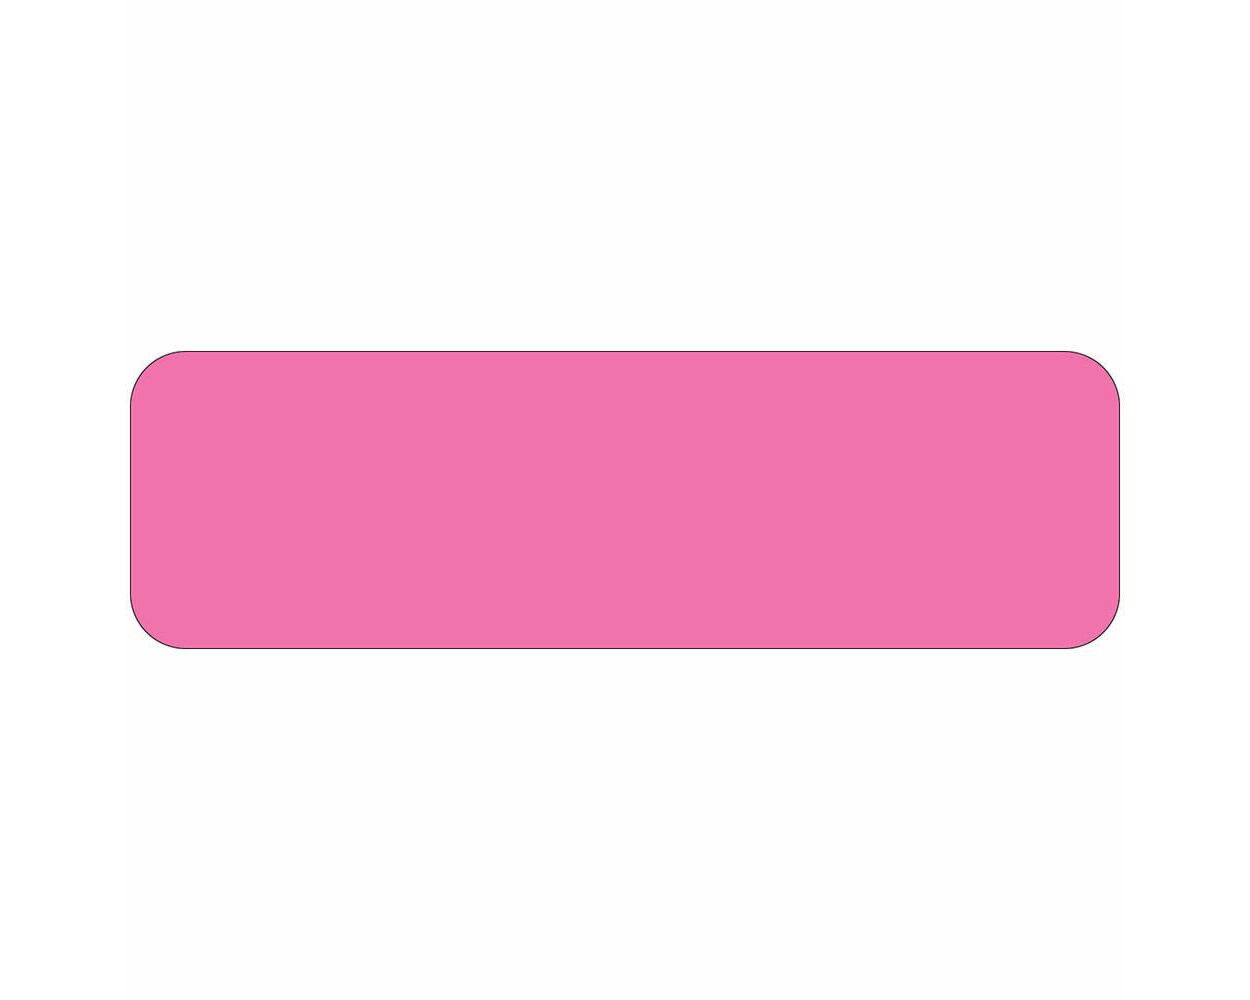 Pink Paper Color Code Label - PDC (59700053)